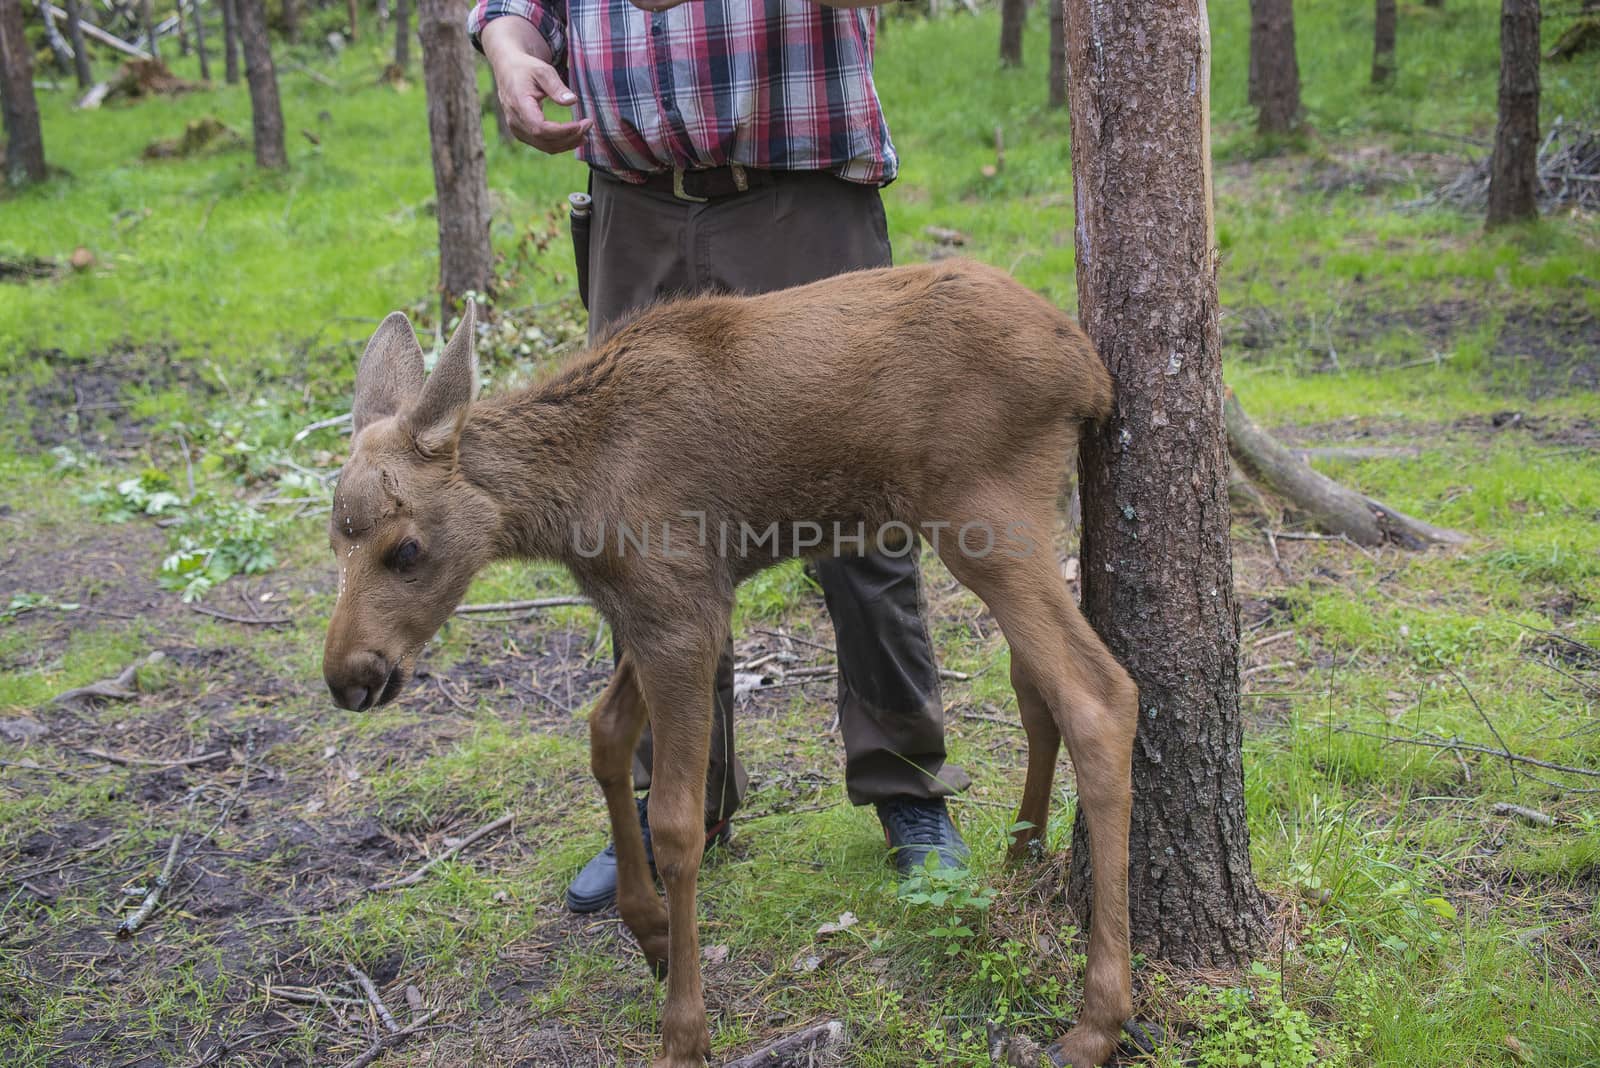 moose in a wildlife park (female calf) by steirus